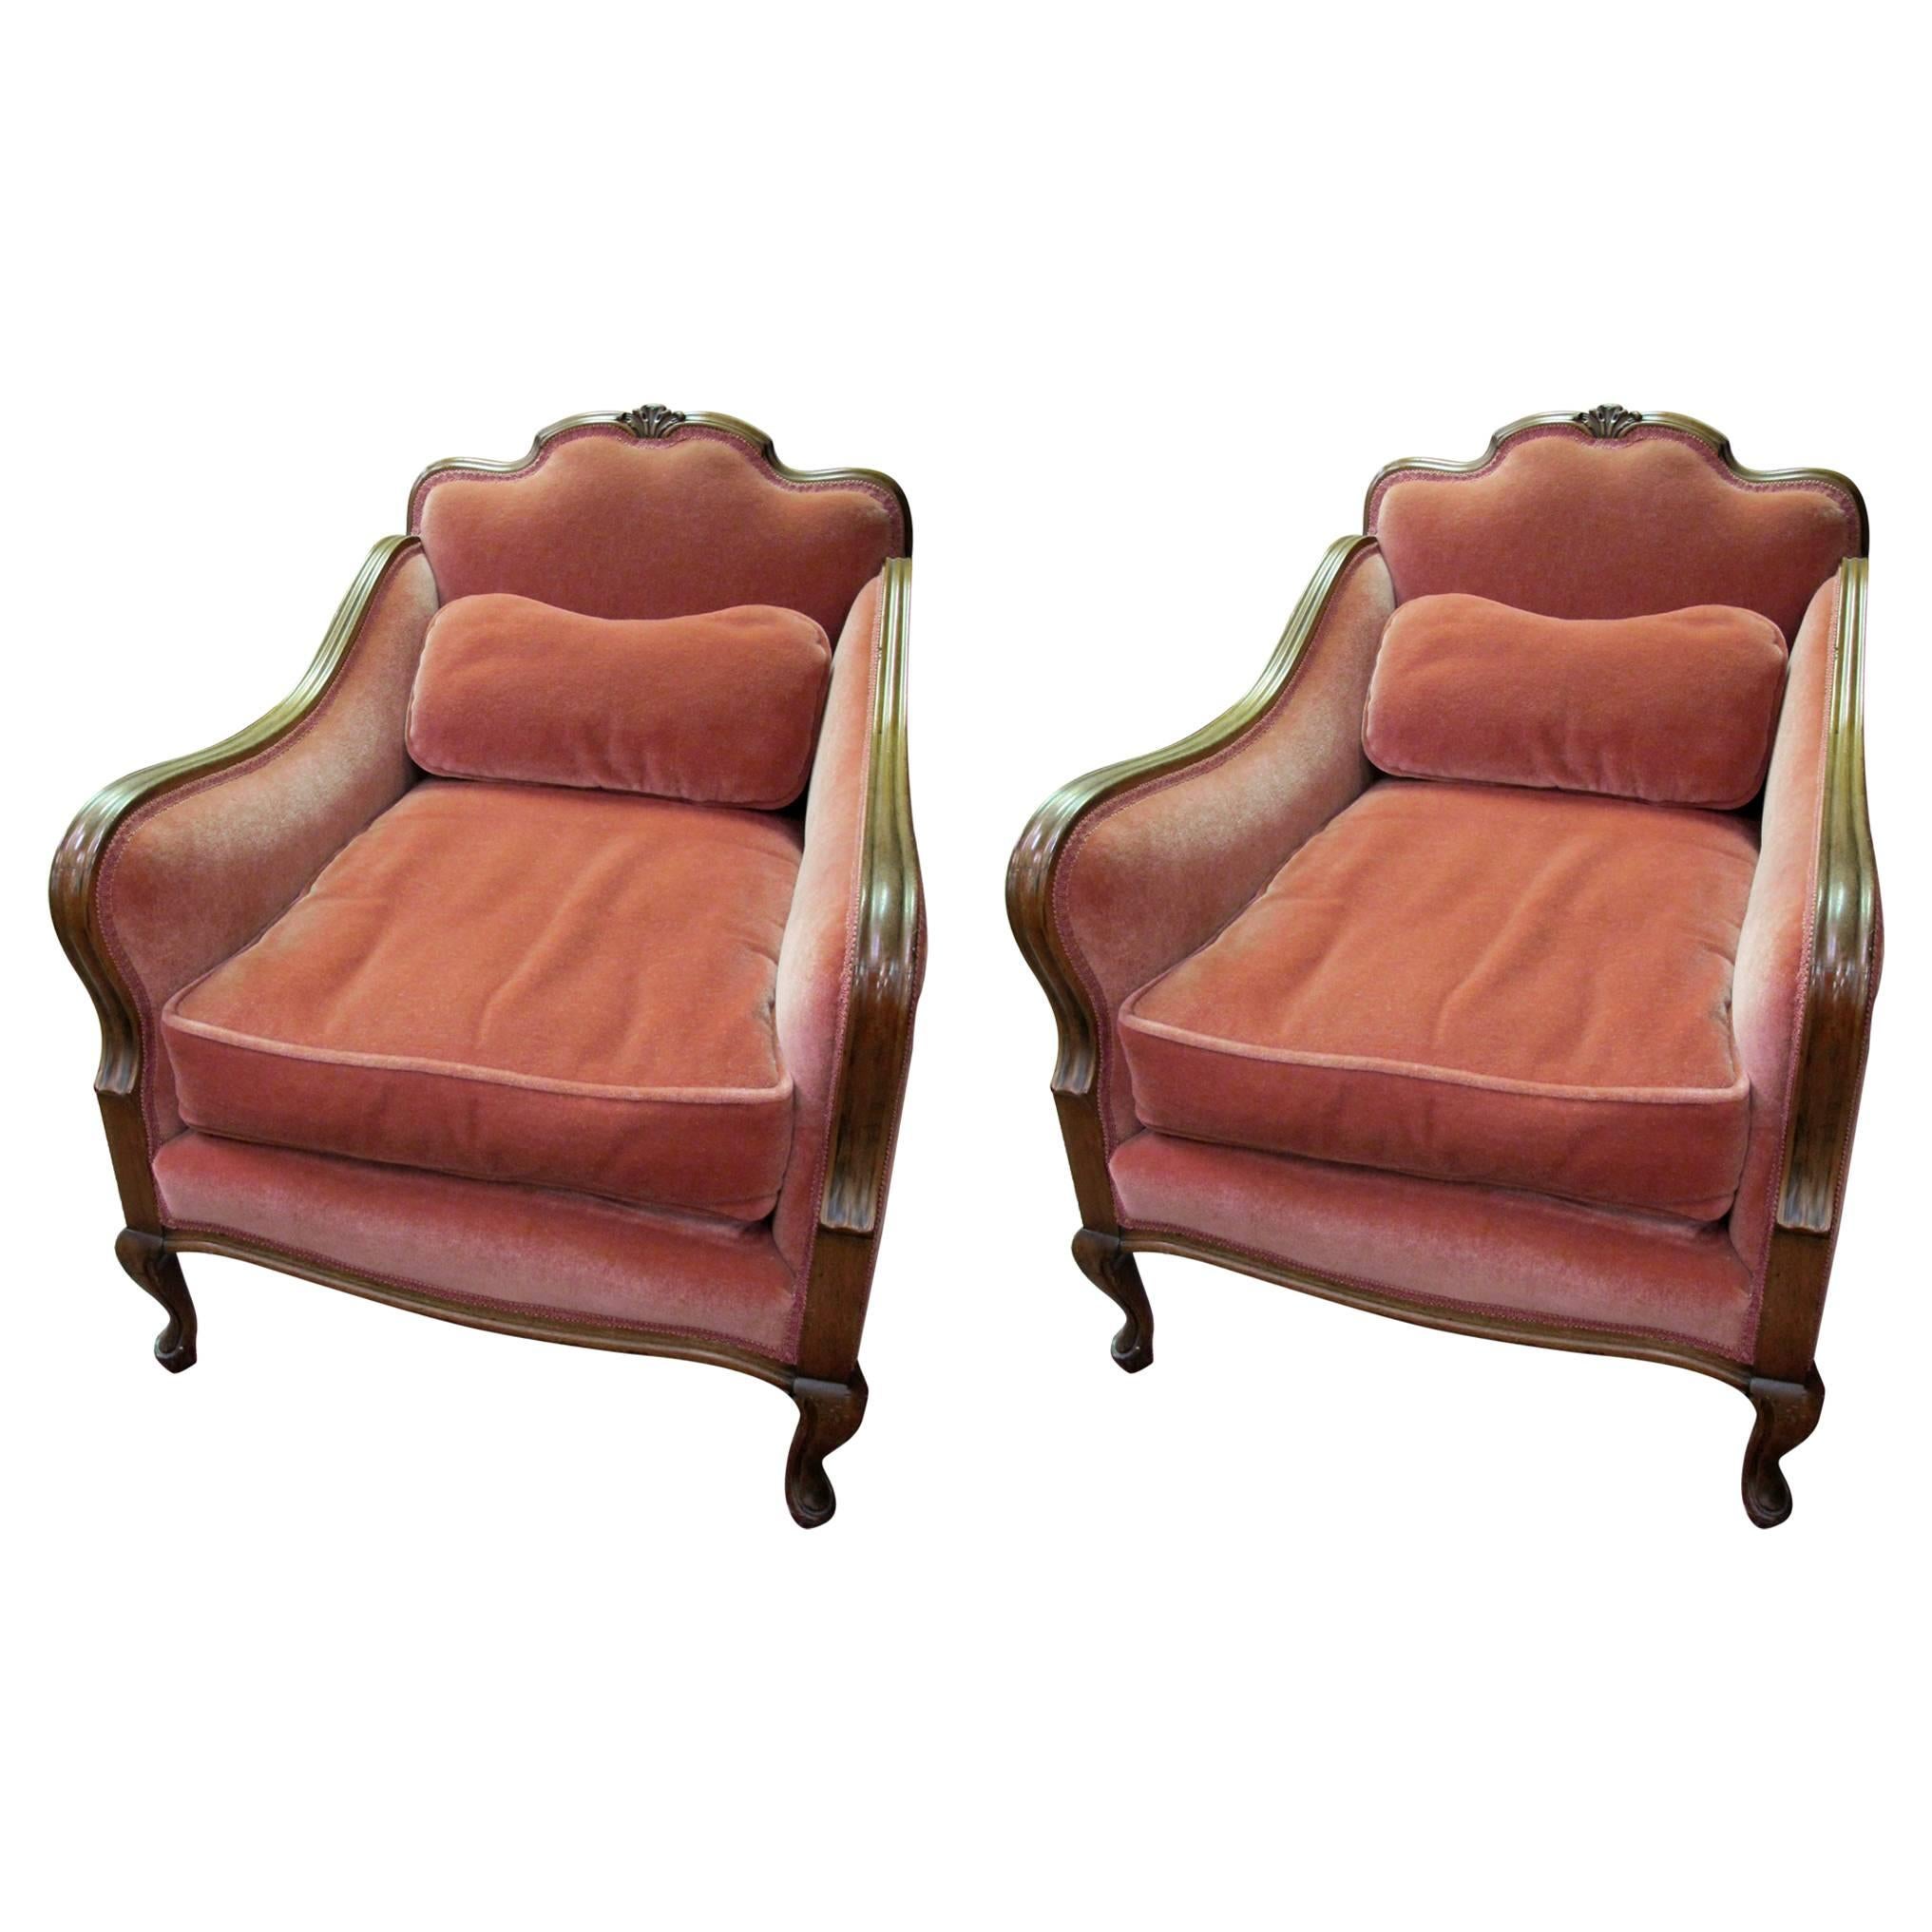 1910 Silk Mohair Ladies and Gentleman's Chair, Pair For Sale